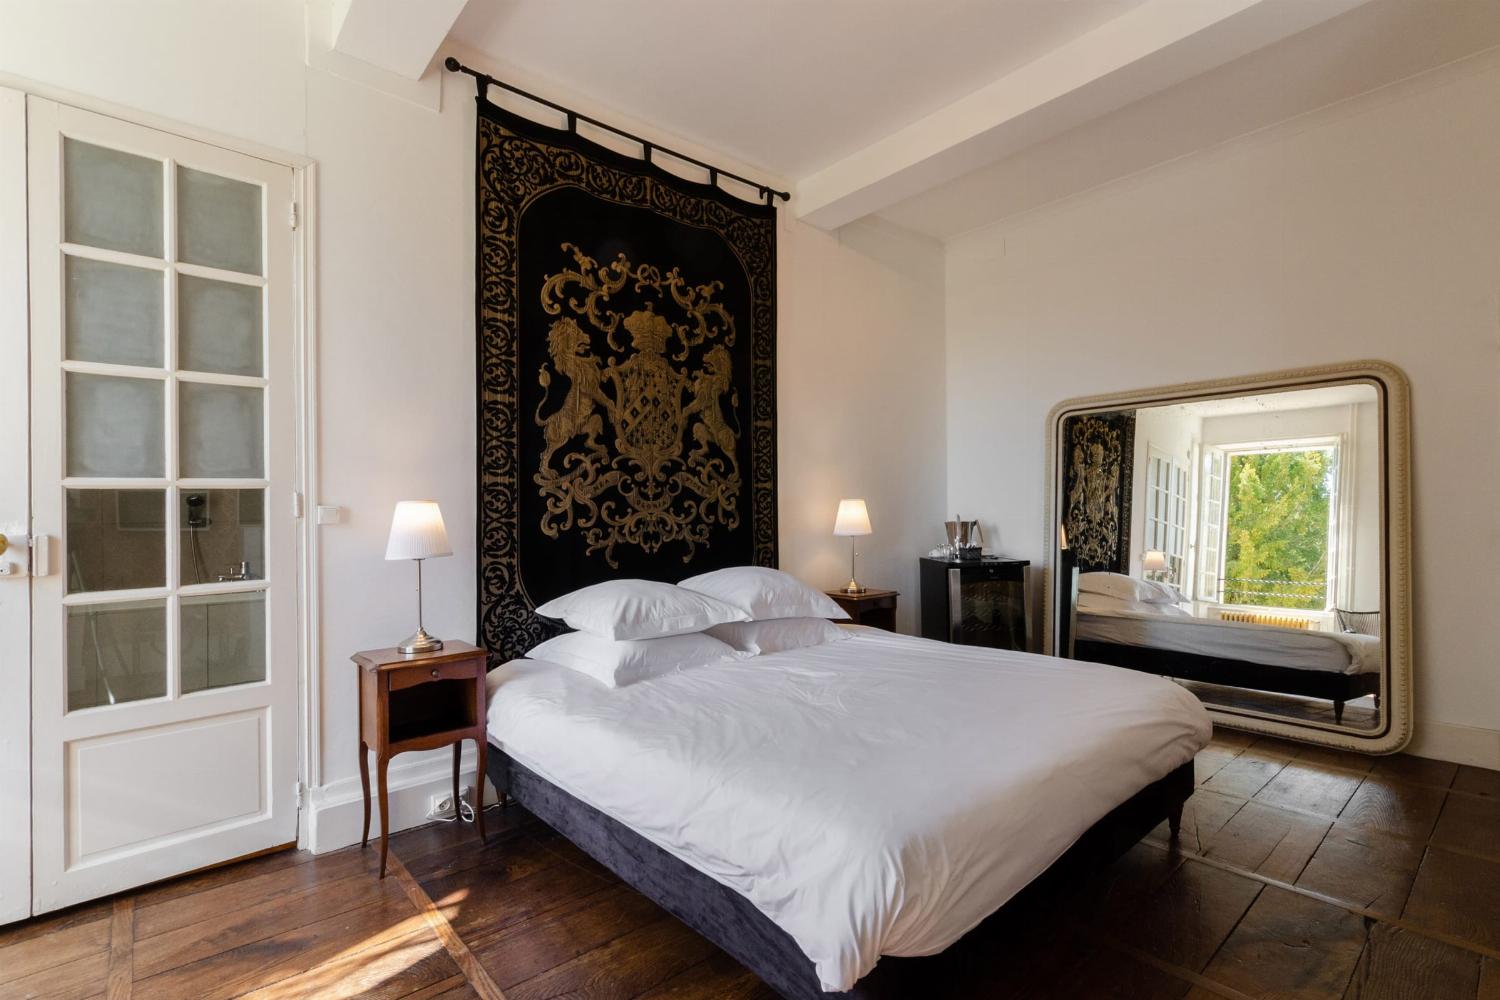 Bedroom | Vacation château in Charente